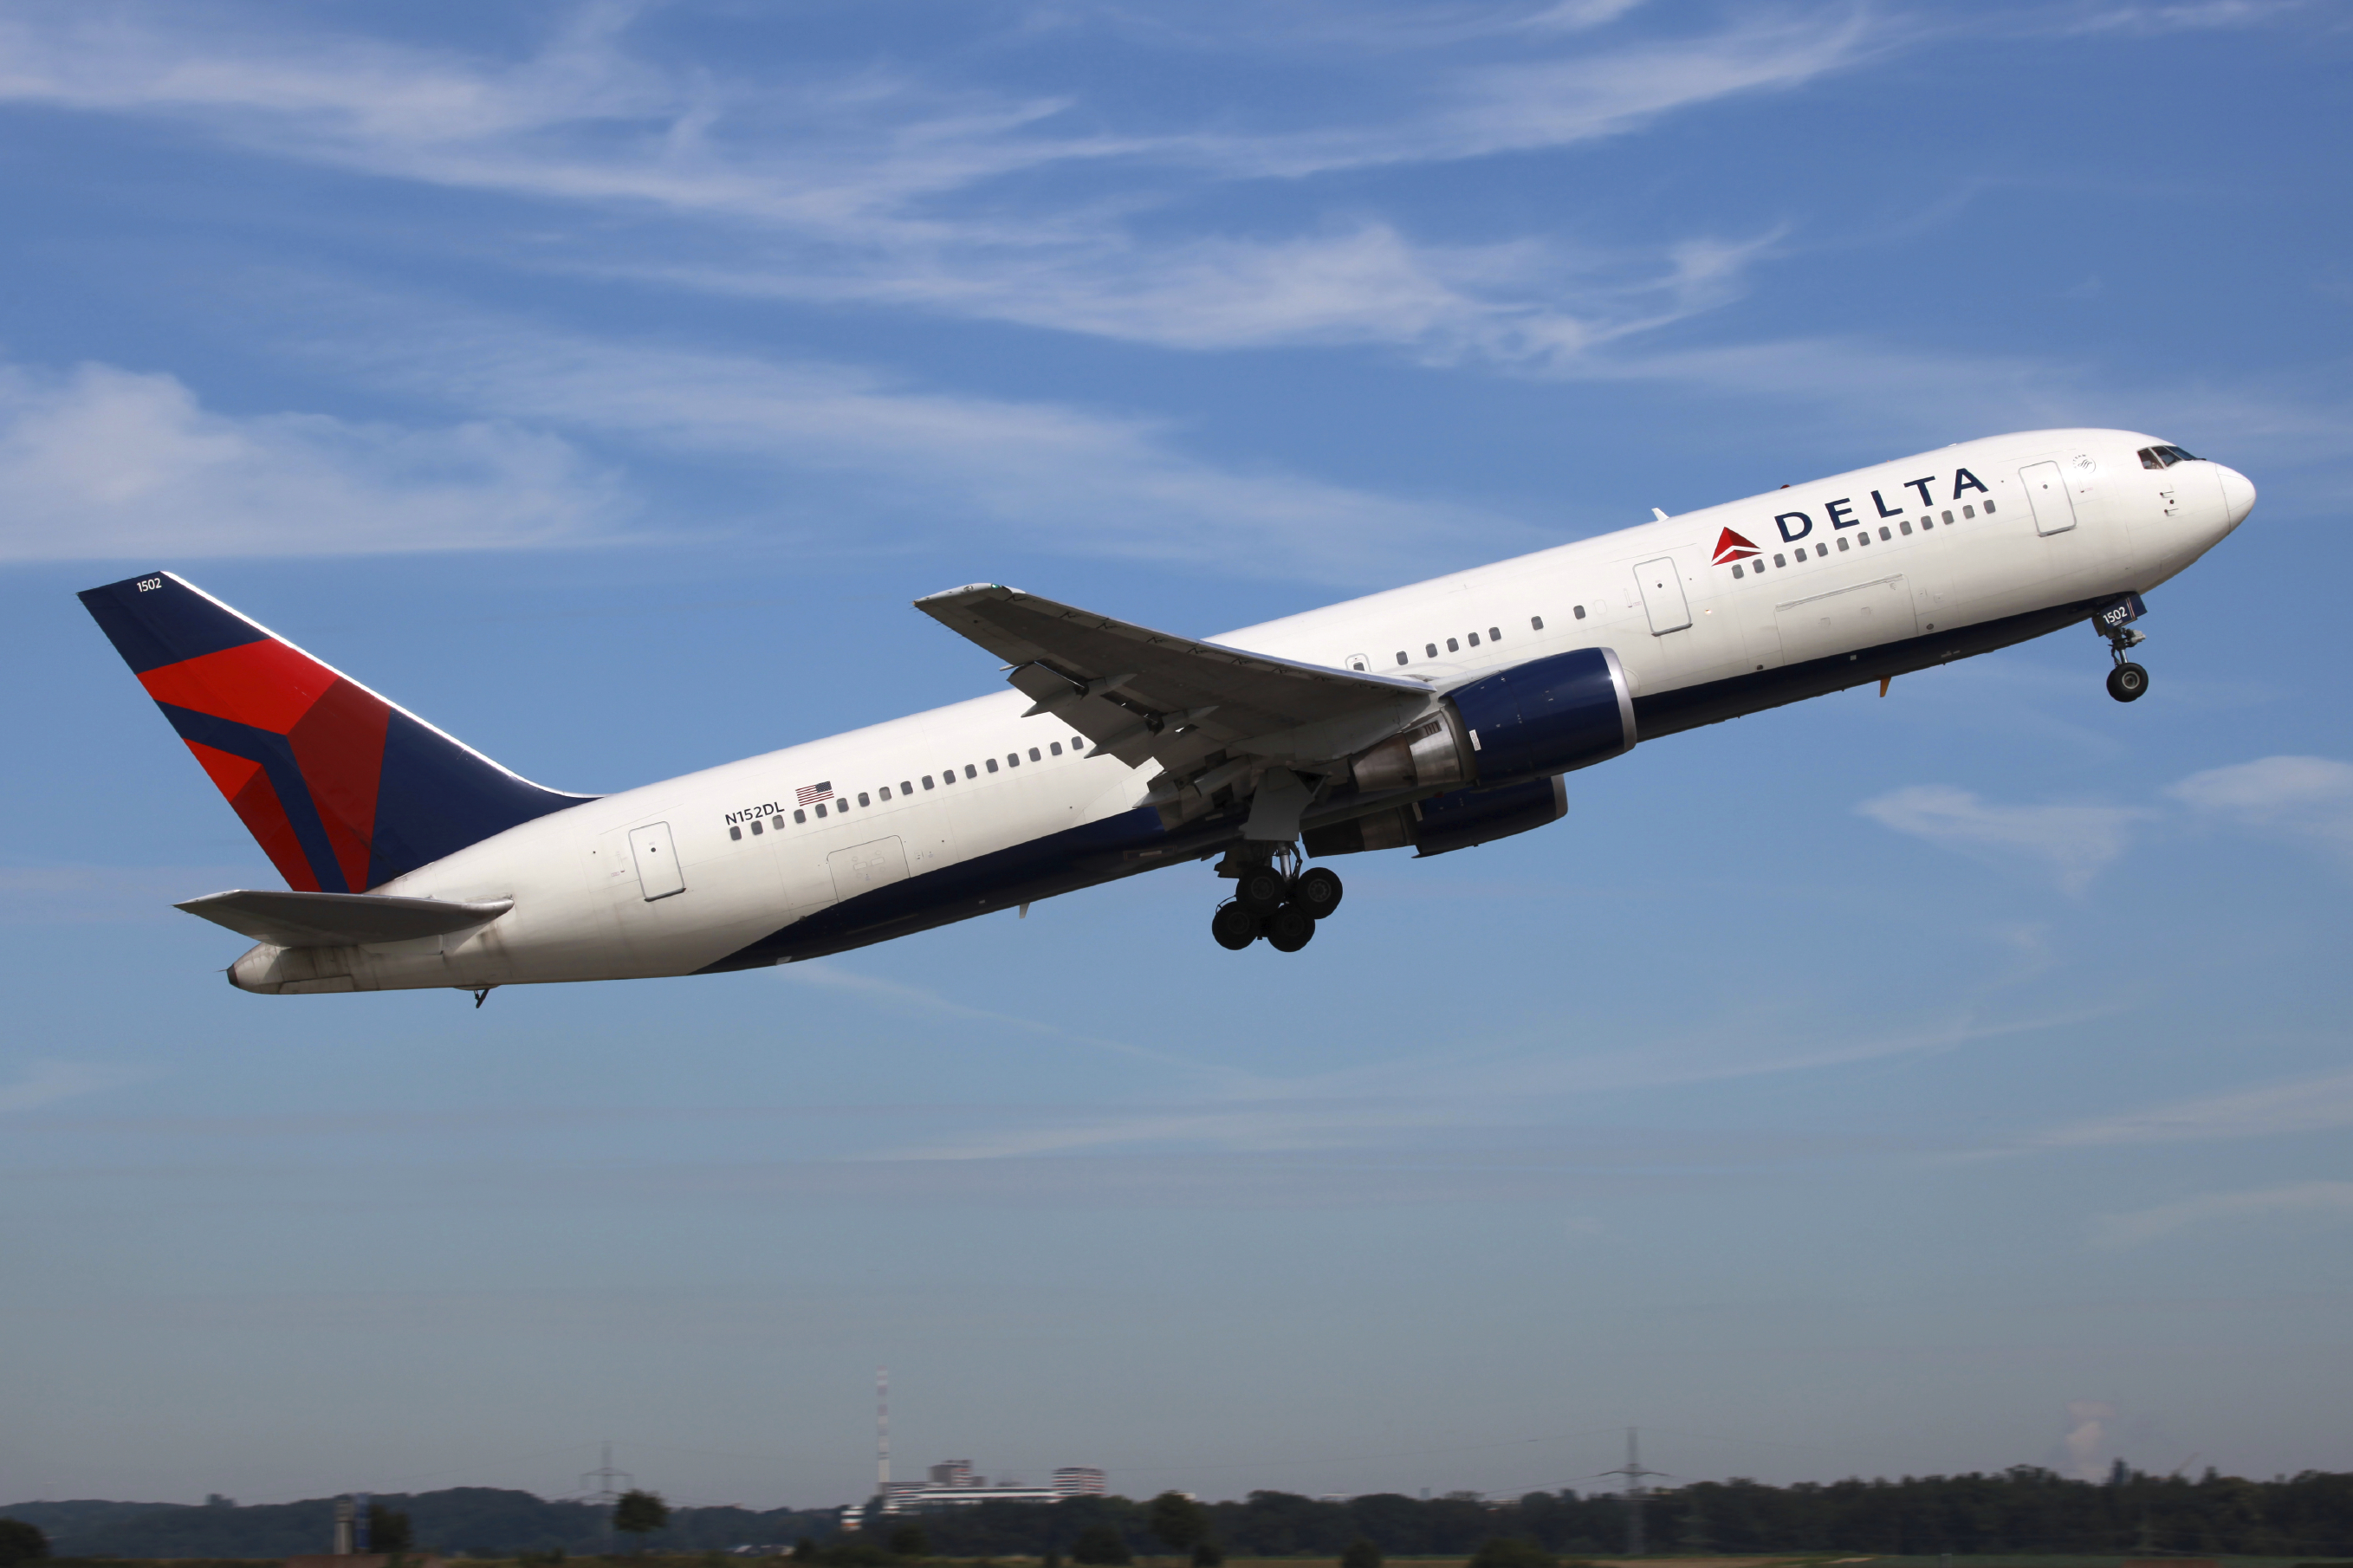 Ode to Delta airlines | caroletowriss.com